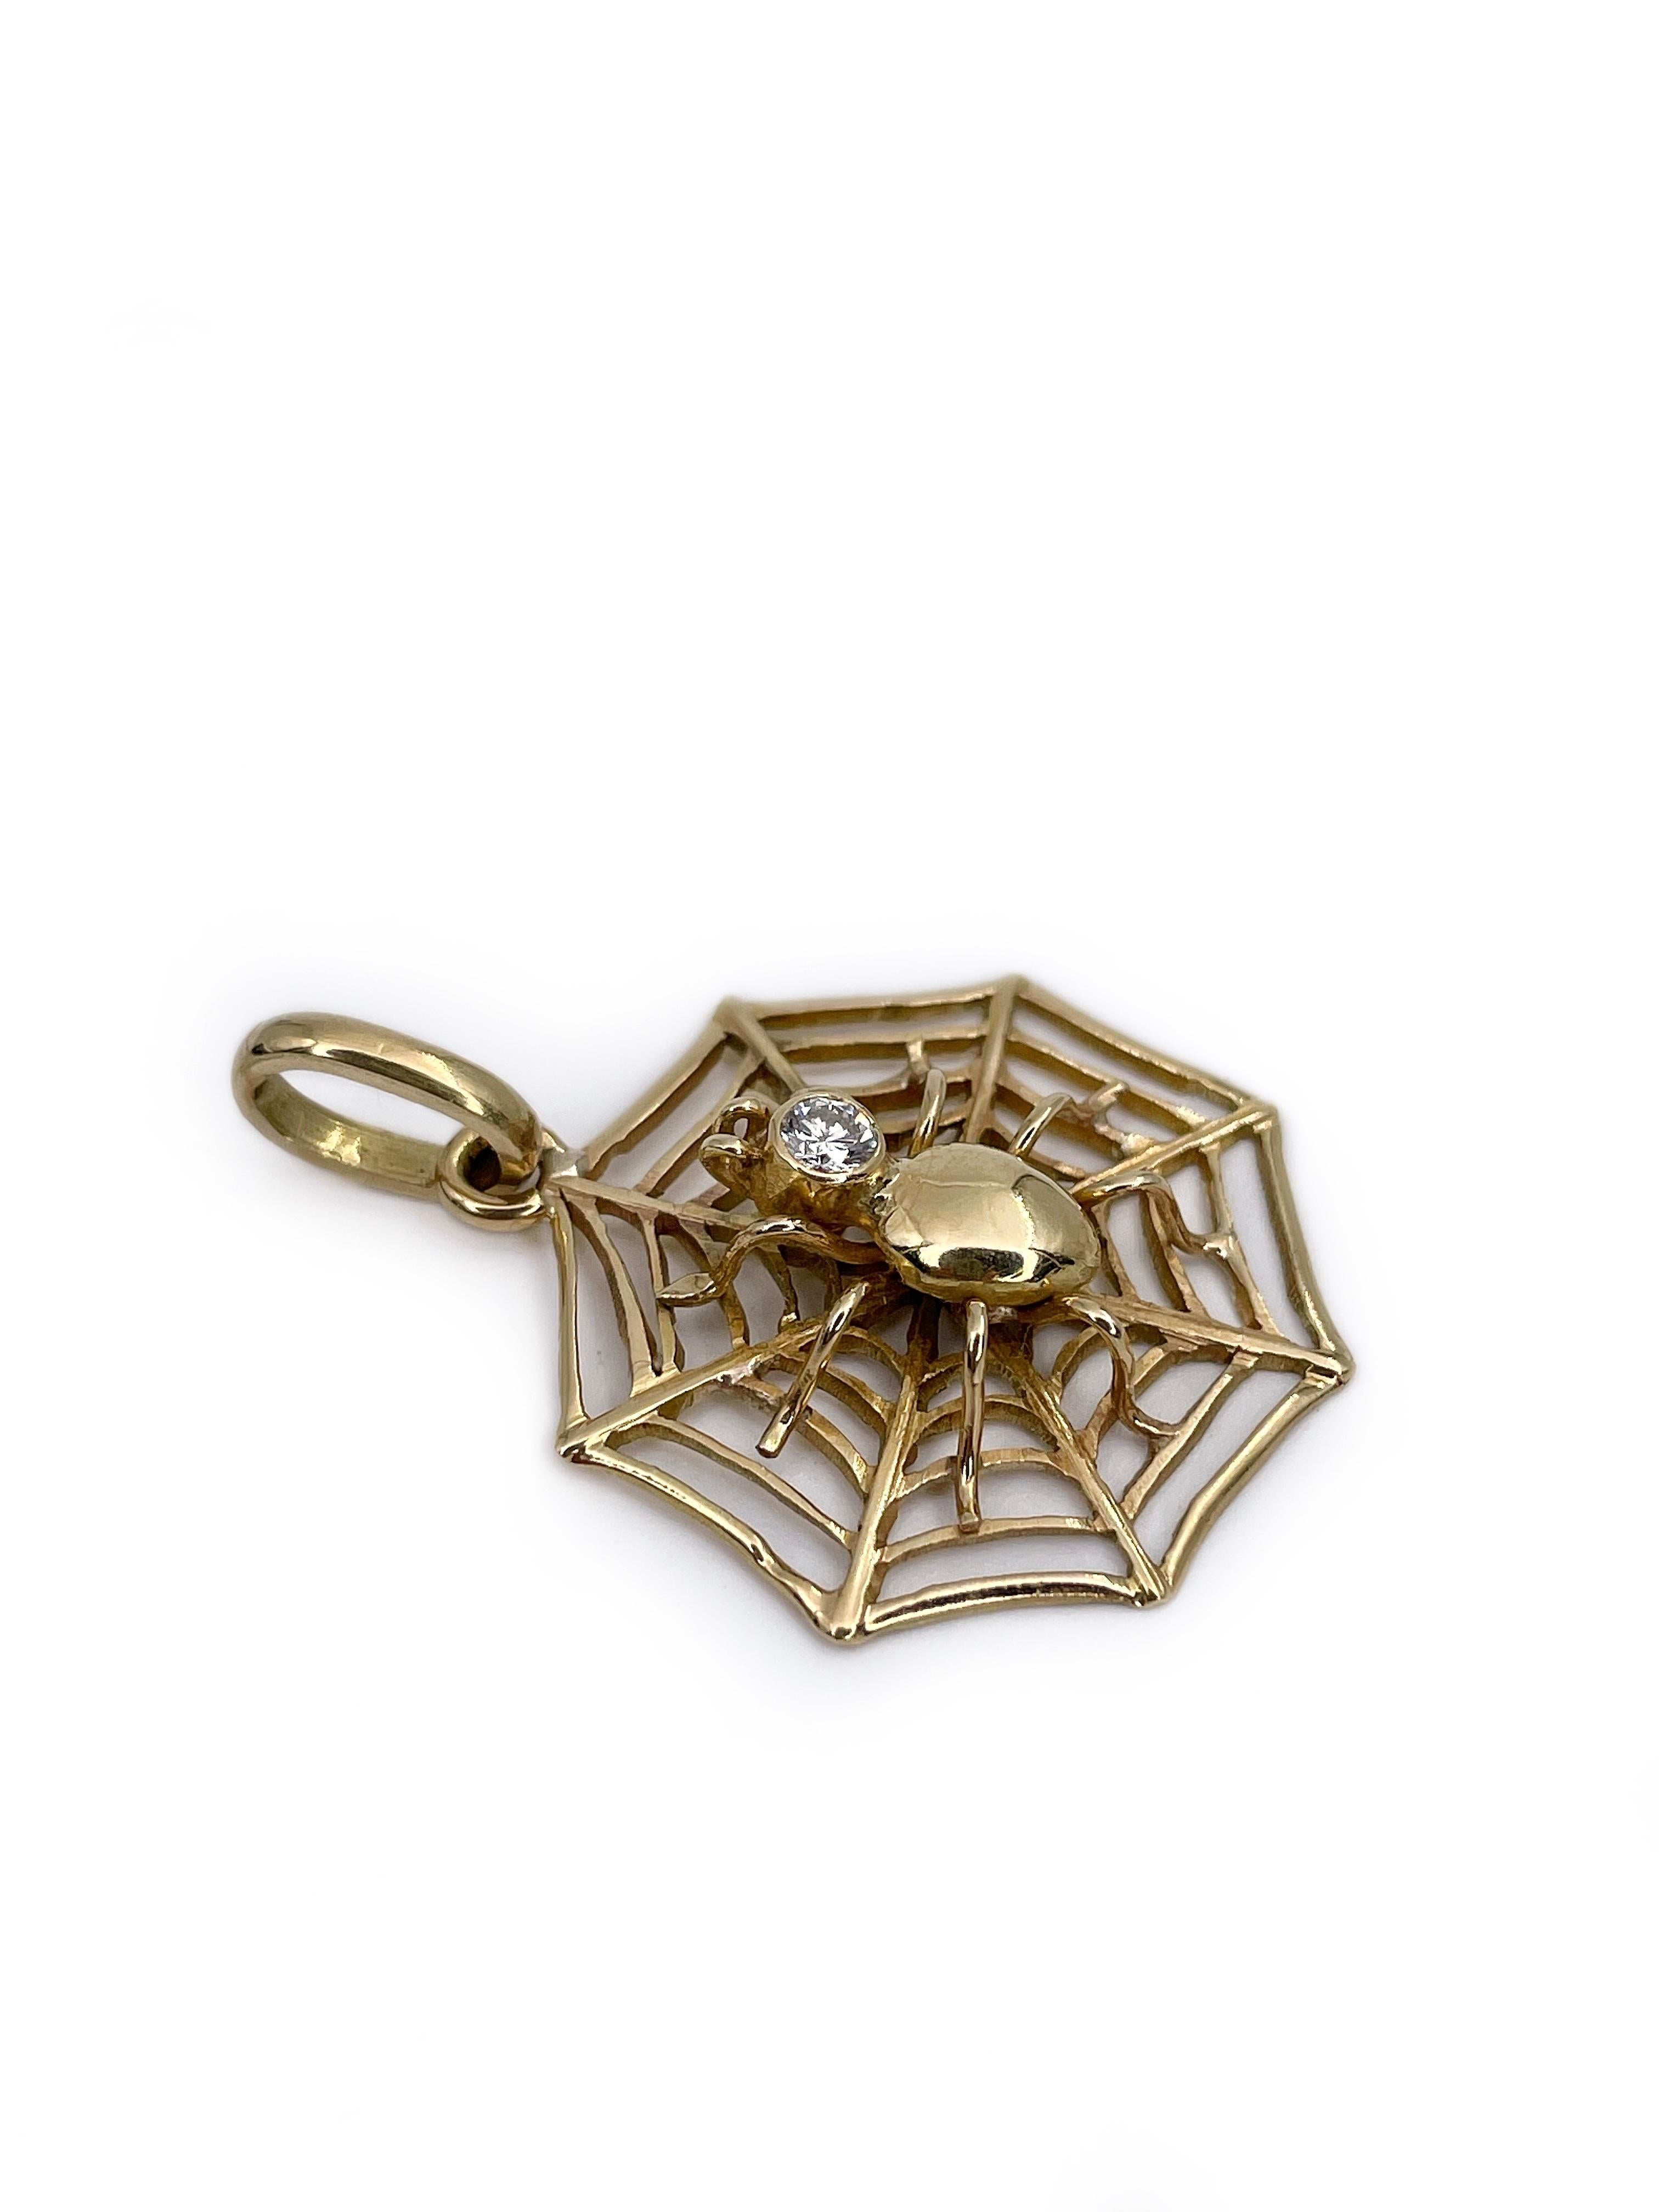 It is a lovely vintage spider web lucky charm pendant crafted in 14K yellow gold. The piece features one brilliant cut diamond: 0.08ct, RW-W, VS2.

Weight: 3.90g
Size: 3.5x2.5cm

———

If you have any questions, please feel free to ask. We describe